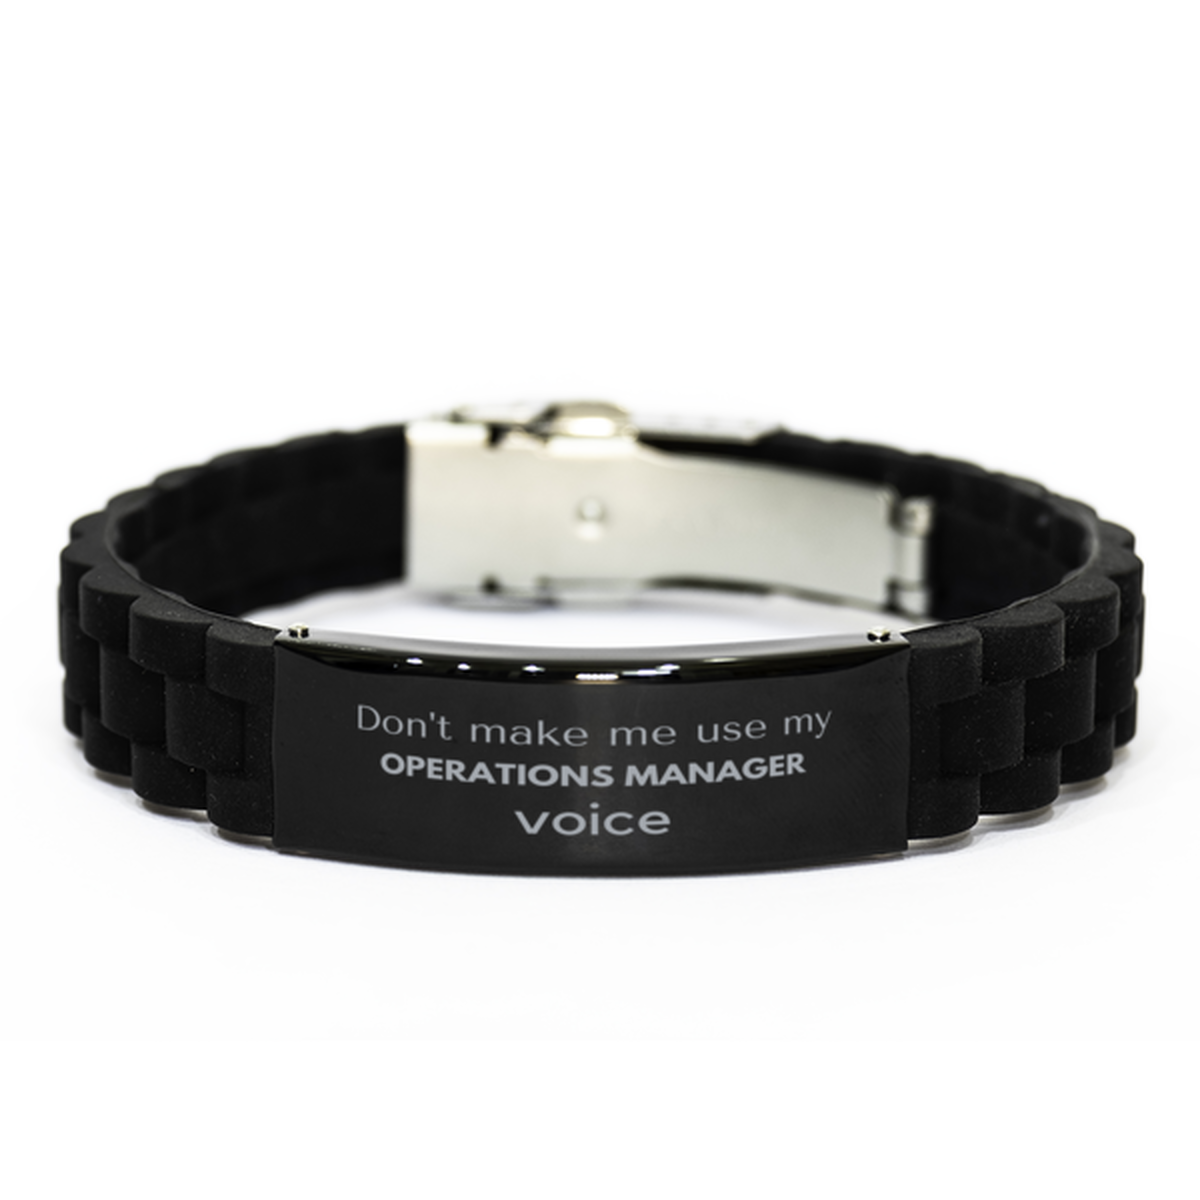 Don't make me use my Operations Manager voice, Sarcasm Operations Manager Gifts, Christmas Operations Manager Black Glidelock Clasp Bracelet Birthday Unique Gifts For Operations Manager Coworkers, Men, Women, Colleague, Friends